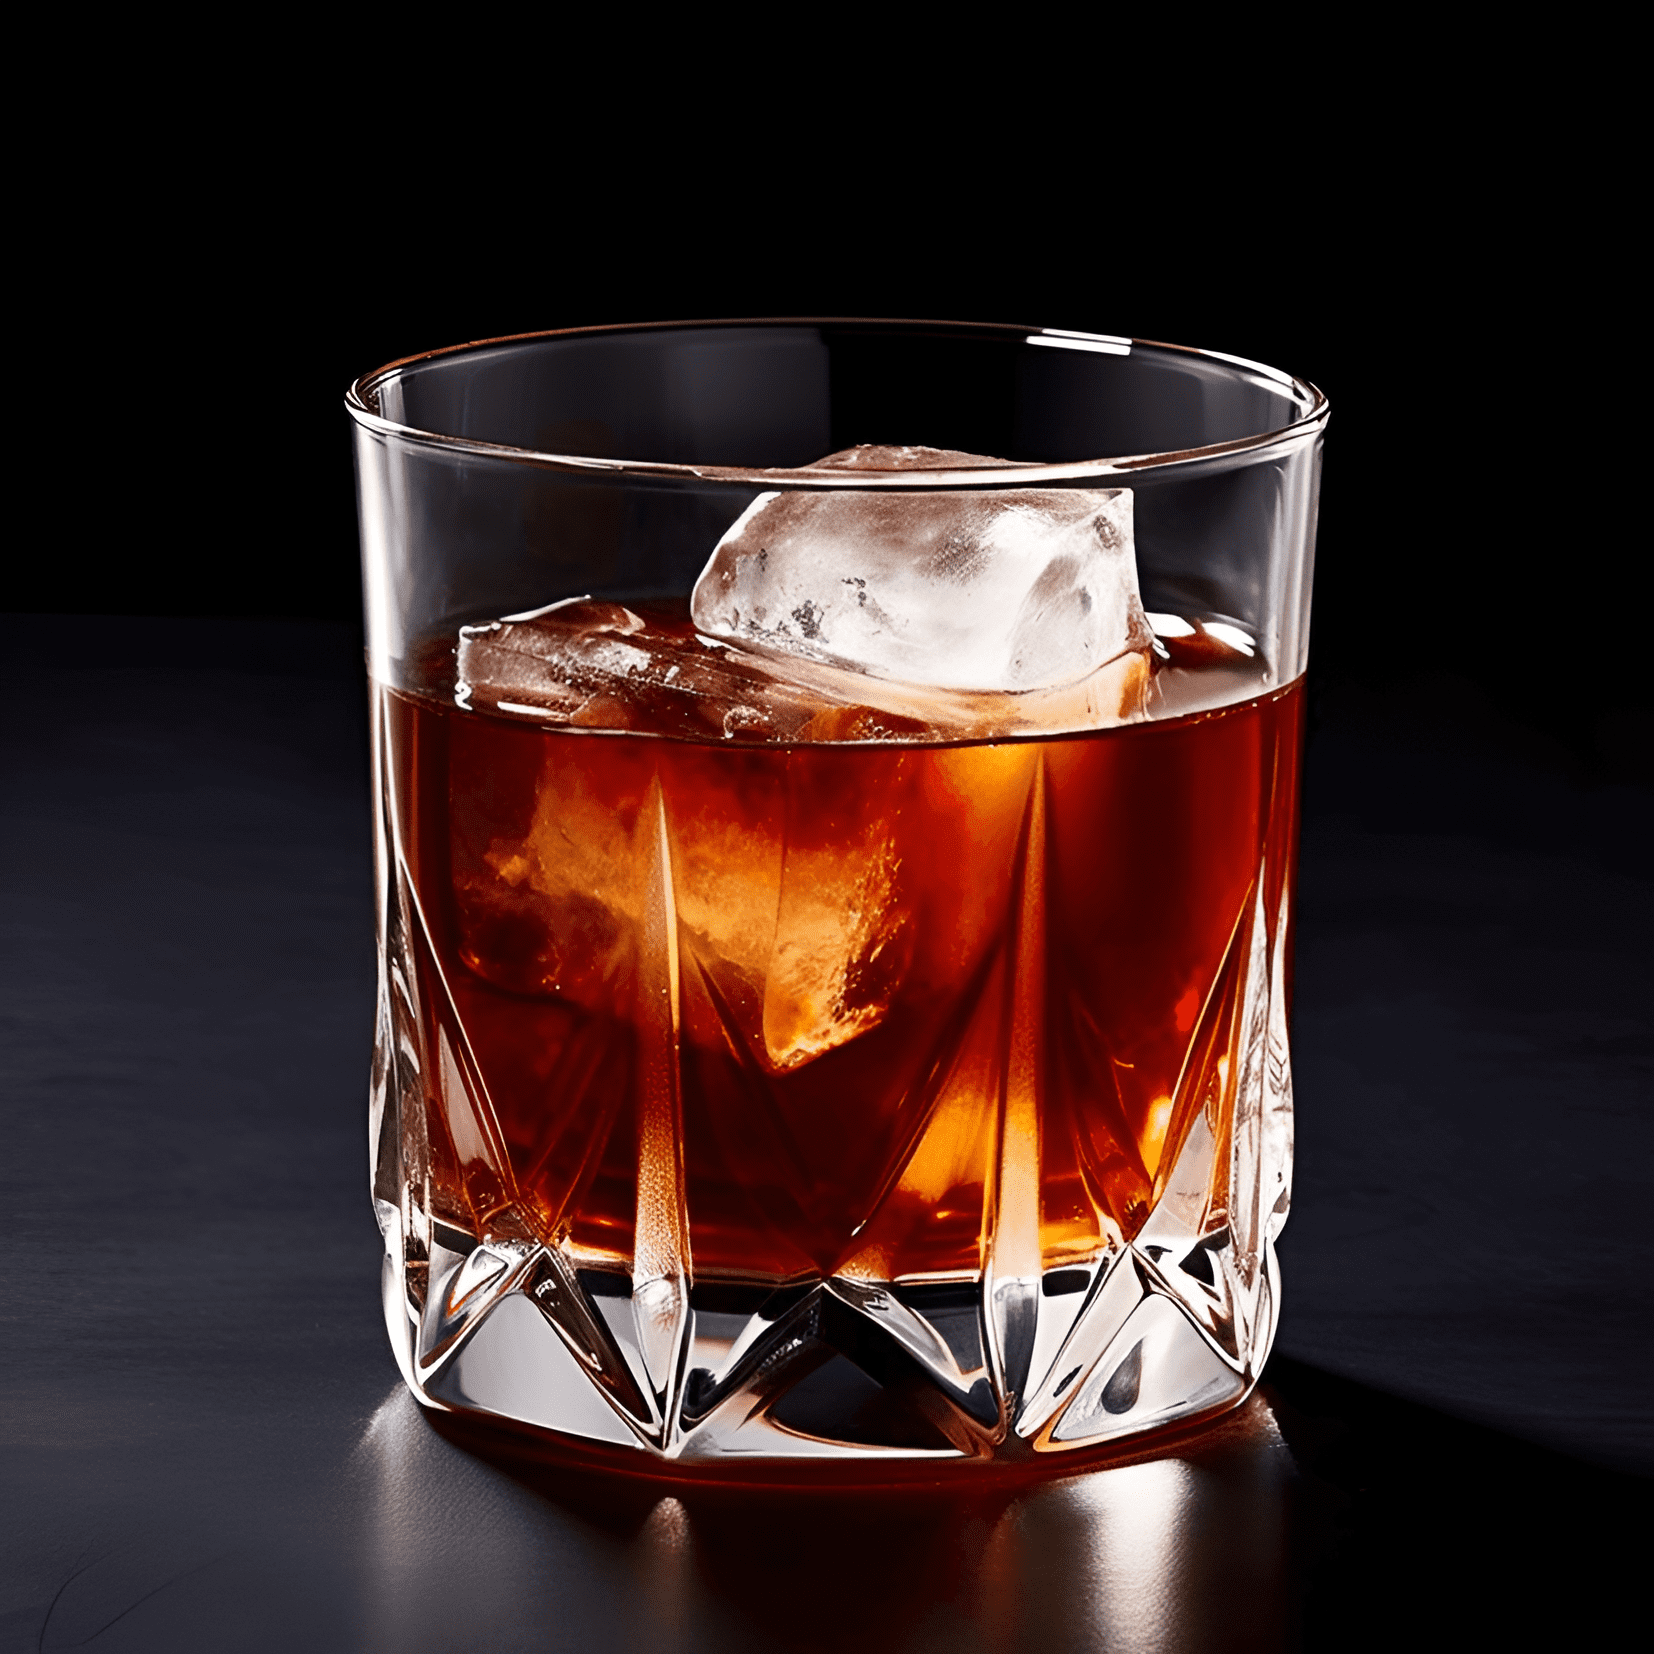 Sneaky Pete Cocktail Recipe - The Sneaky Pete cocktail has a bold, rich taste with a hint of sweetness. It is a strong and warming drink, with a smooth and velvety texture.